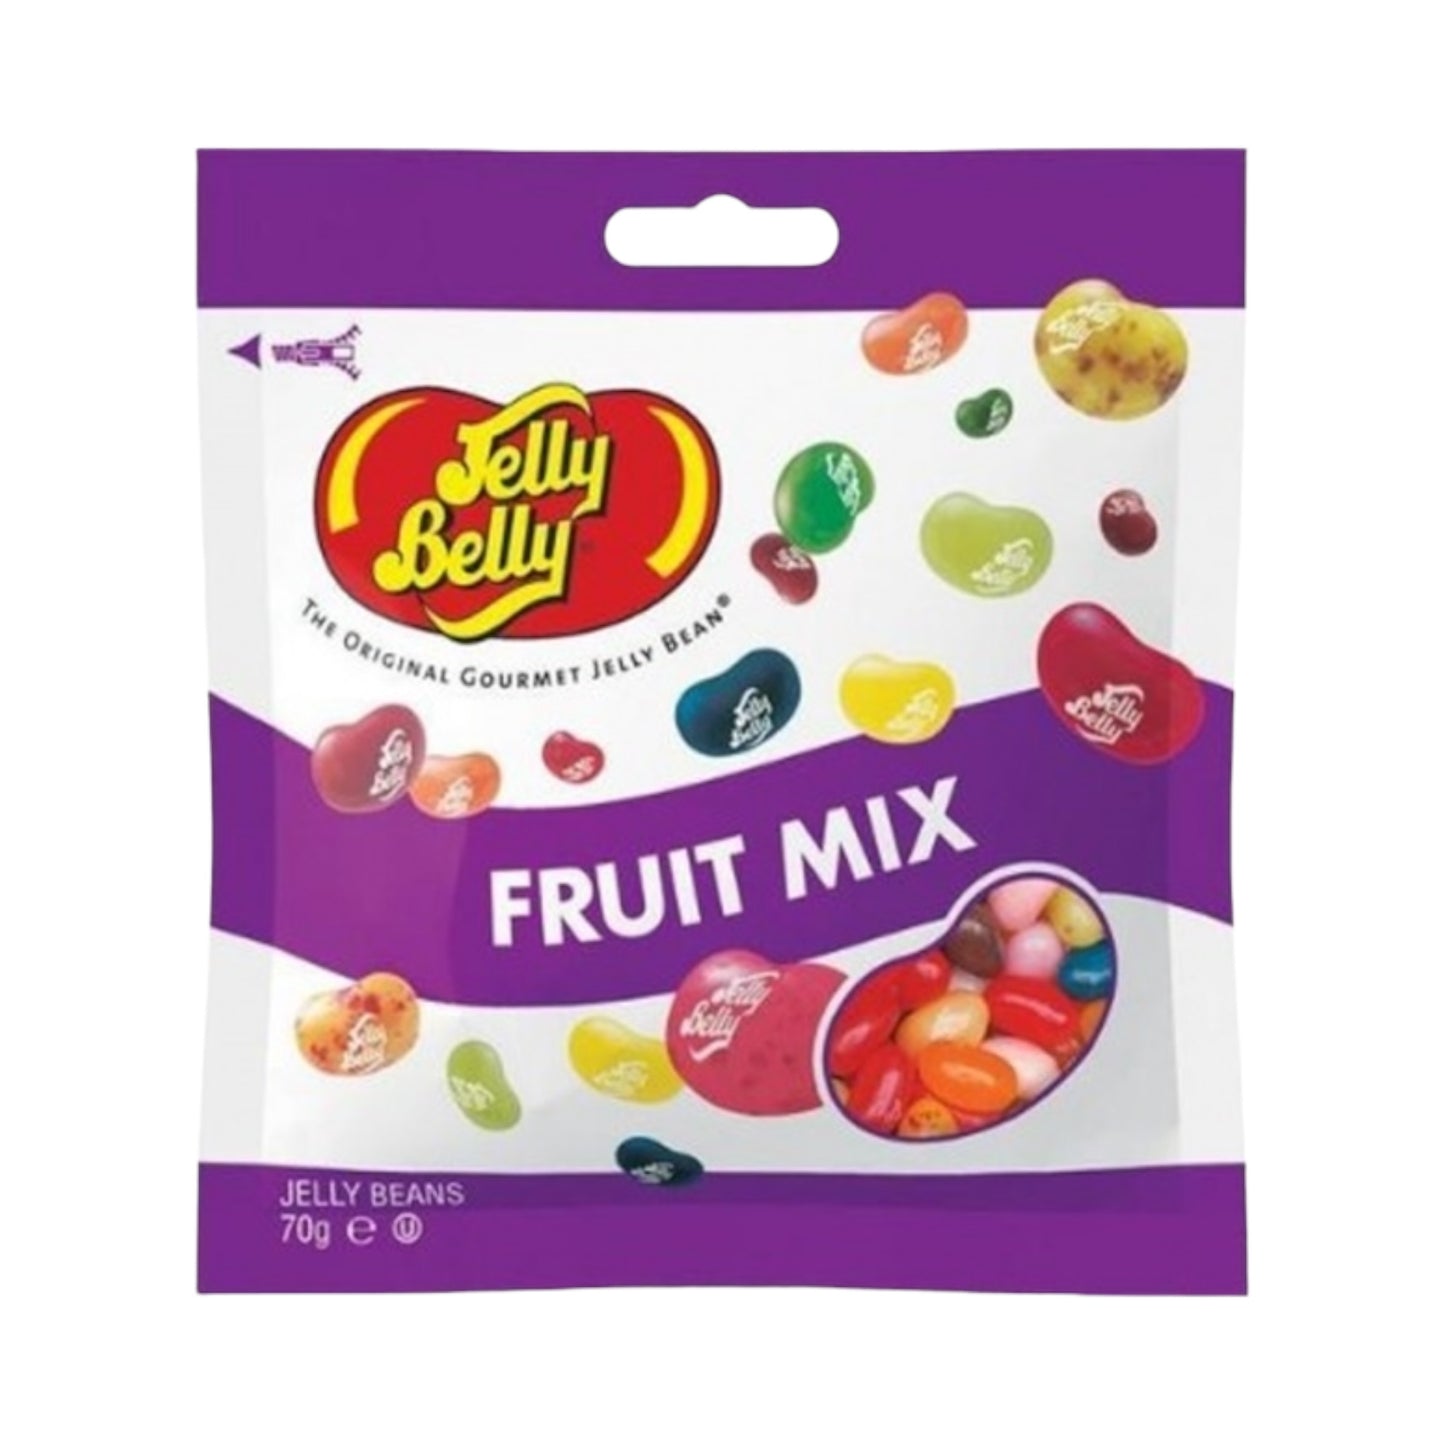 Jelly Belly - Fruit Mix Jelly Beans - 70g